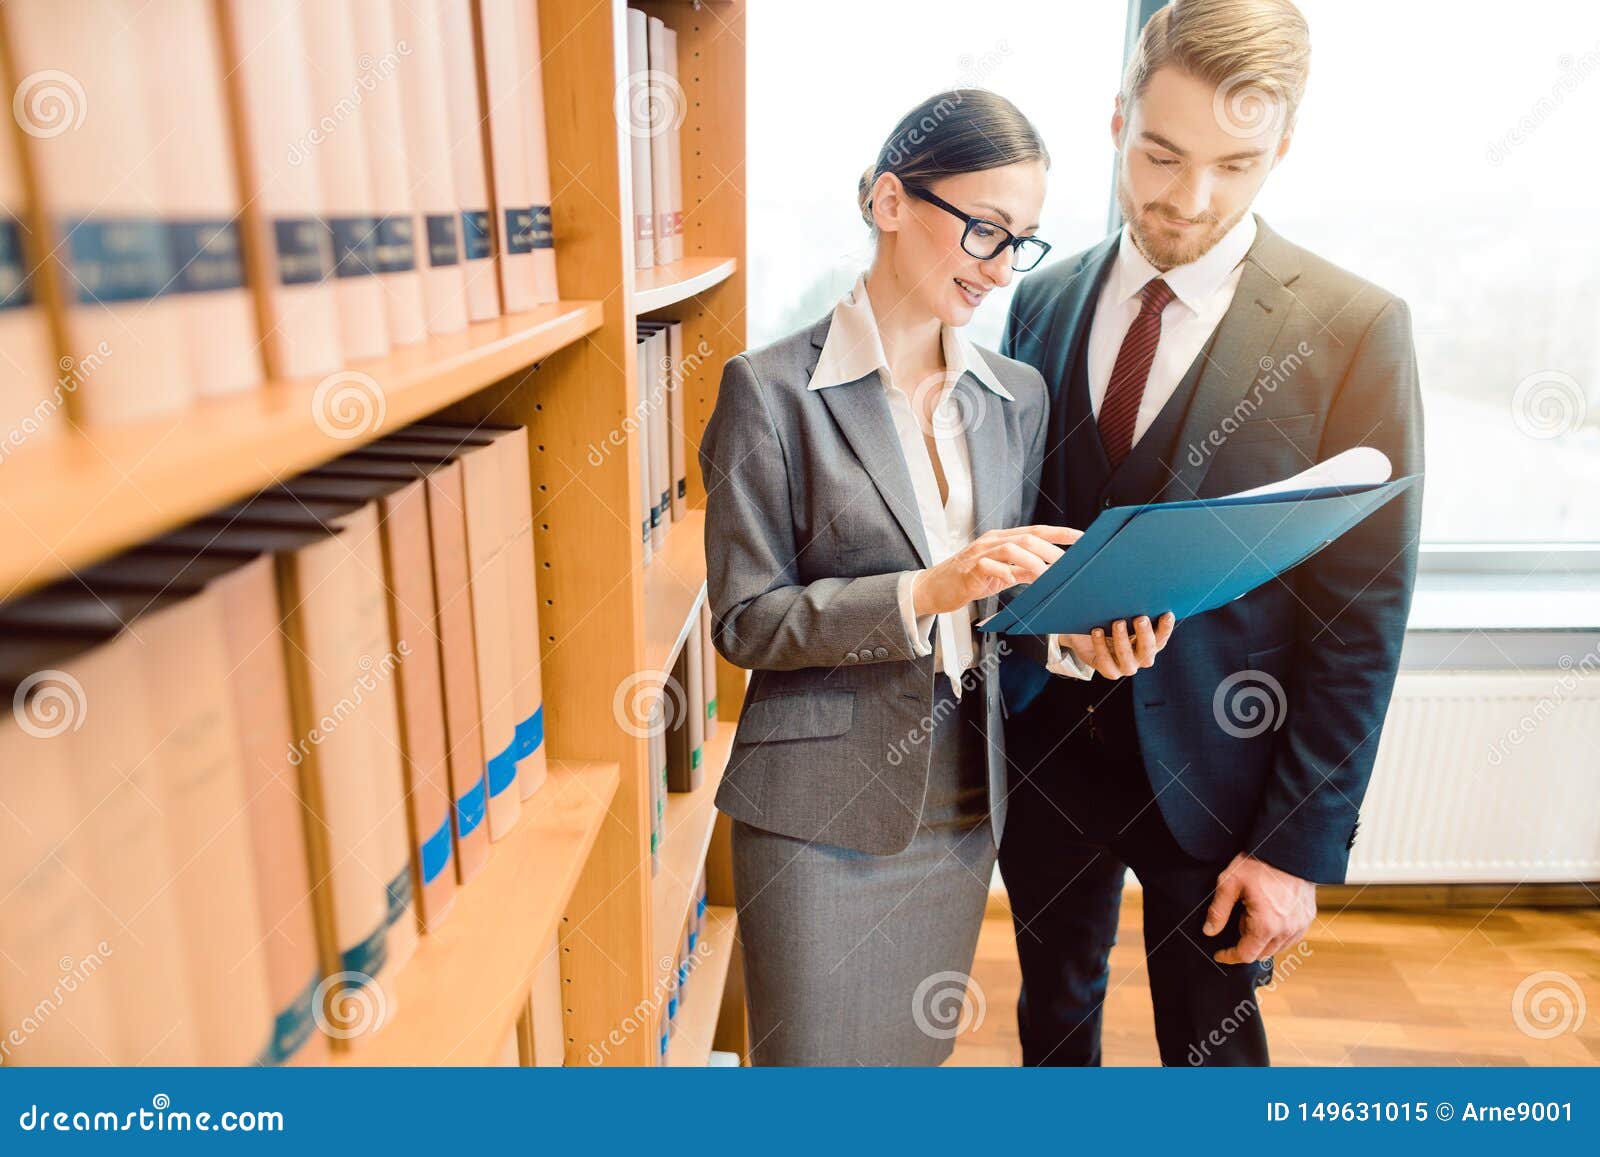 lawyers in library of law firm discussing strategy in a case holding file